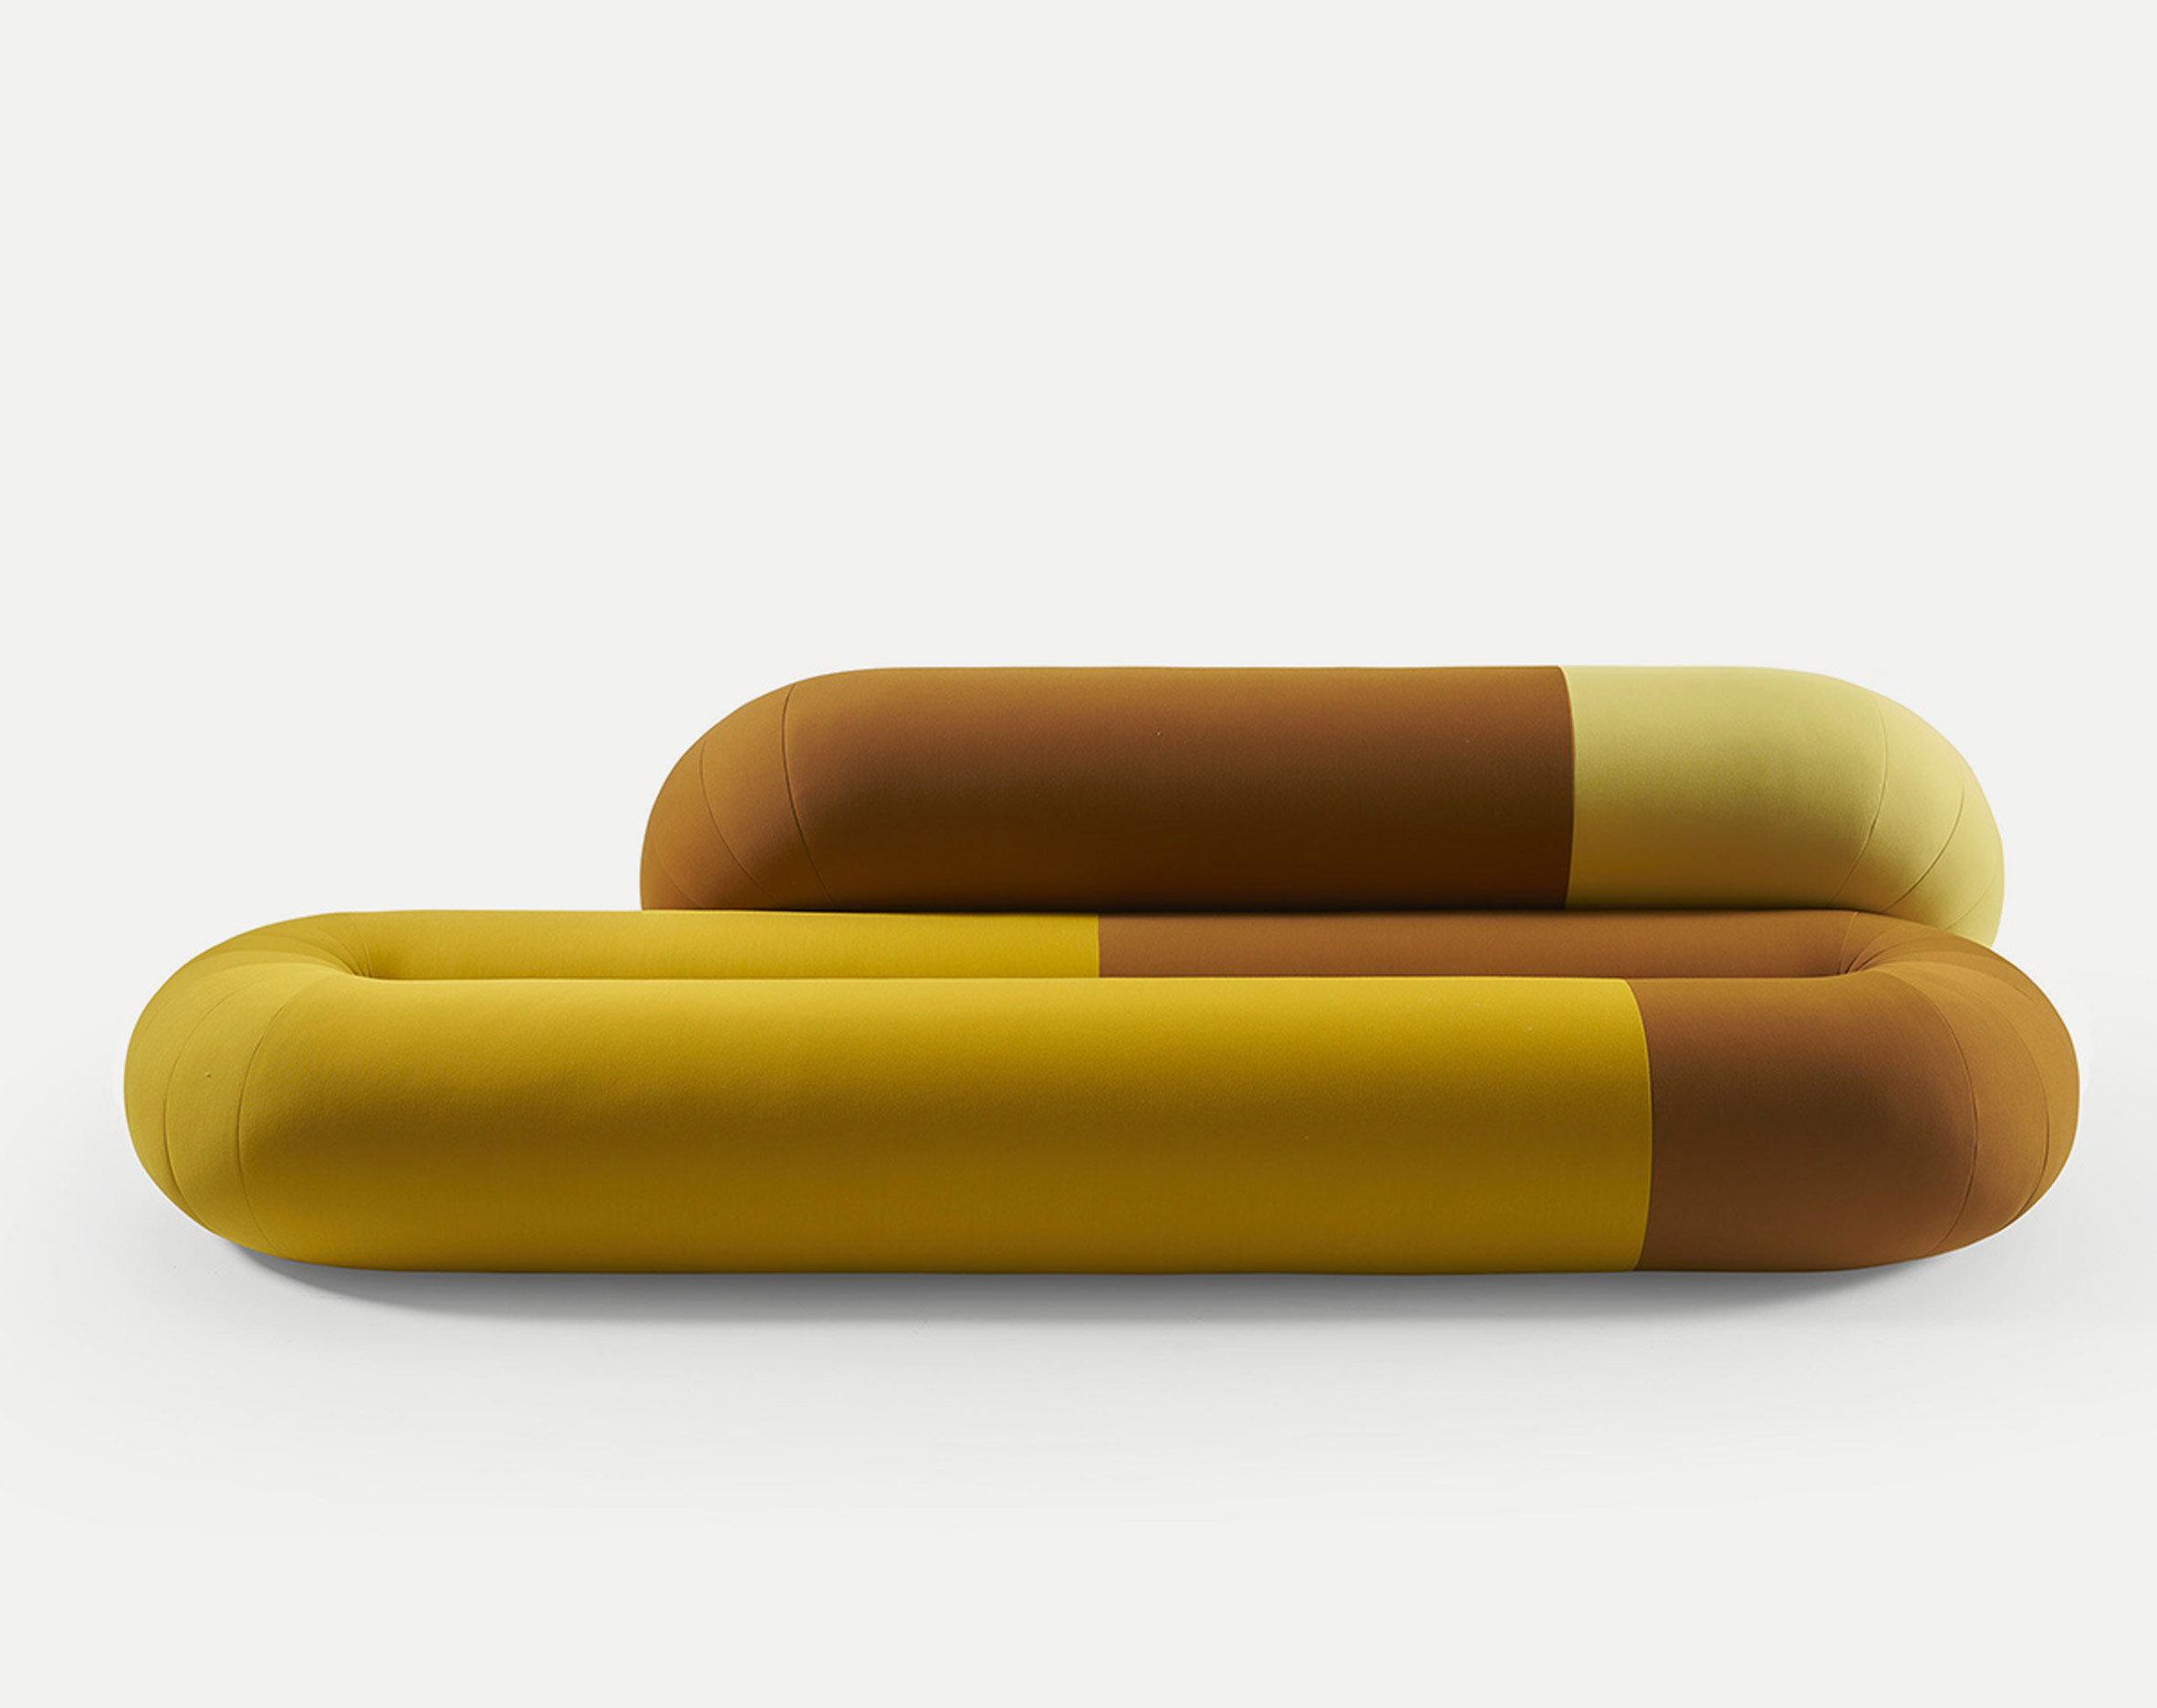 Loop sofa in a mustard, yellow and brown colour